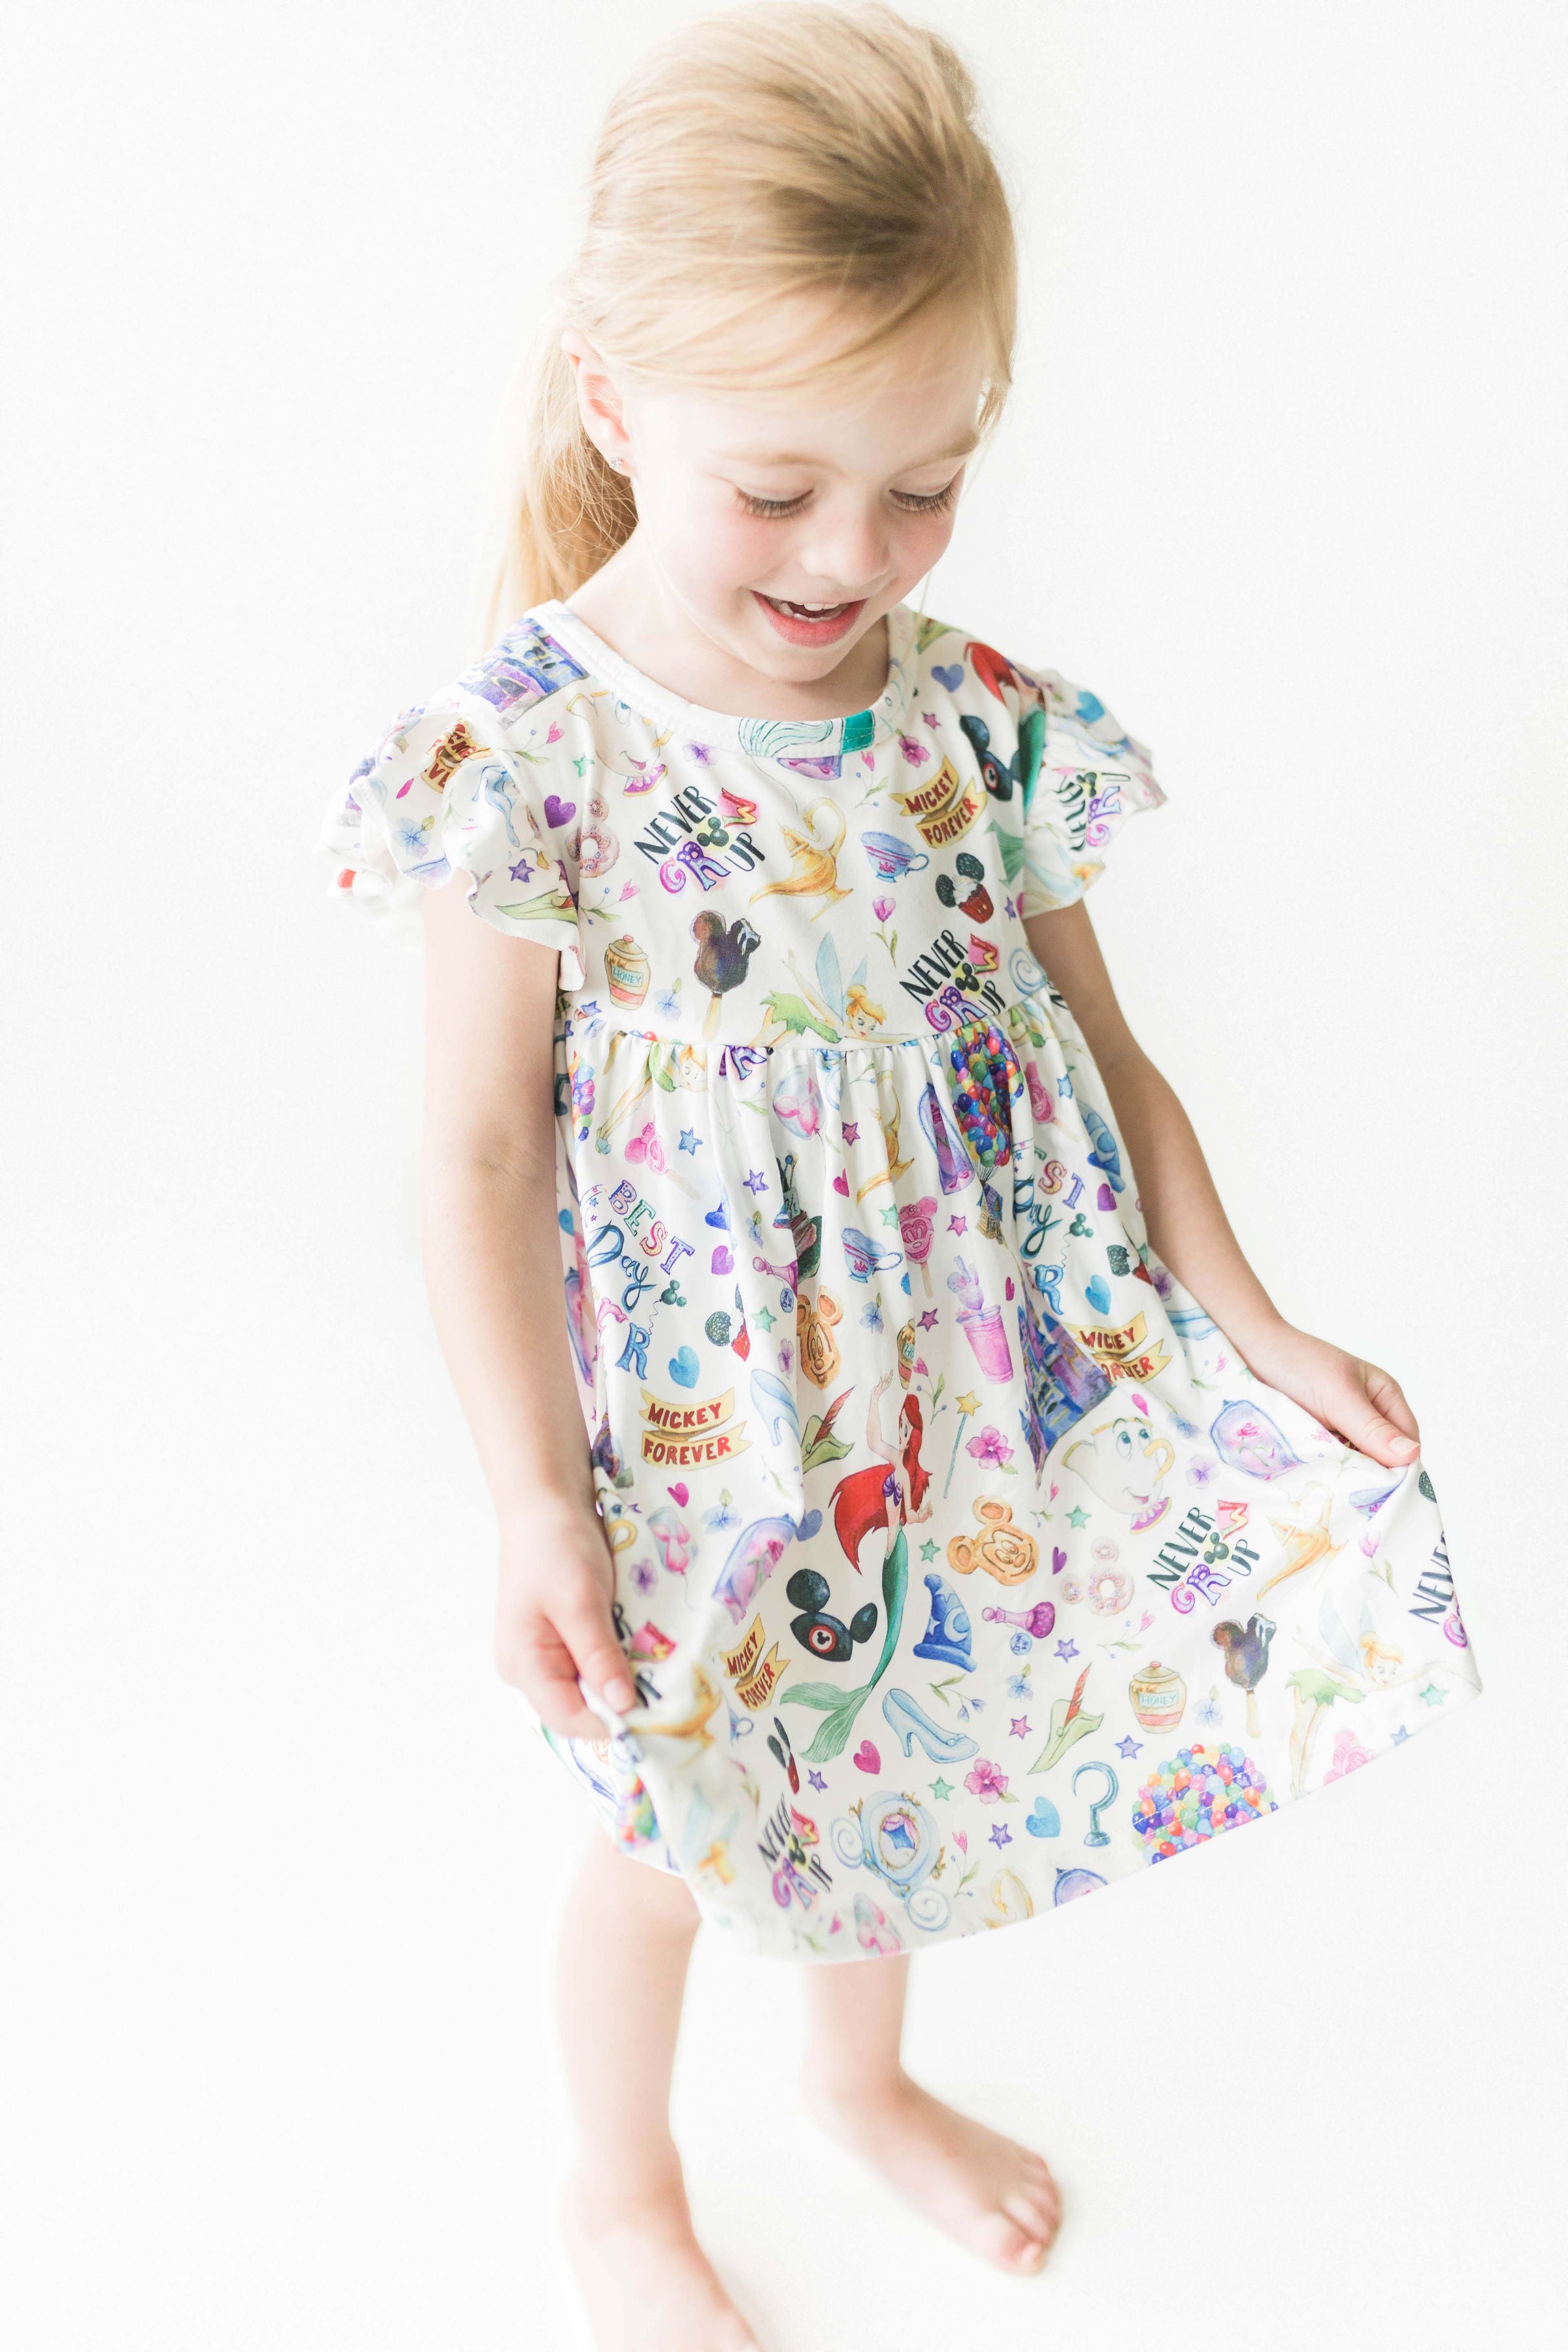 Girls Fun Character Dresses - Best Park Day Ever